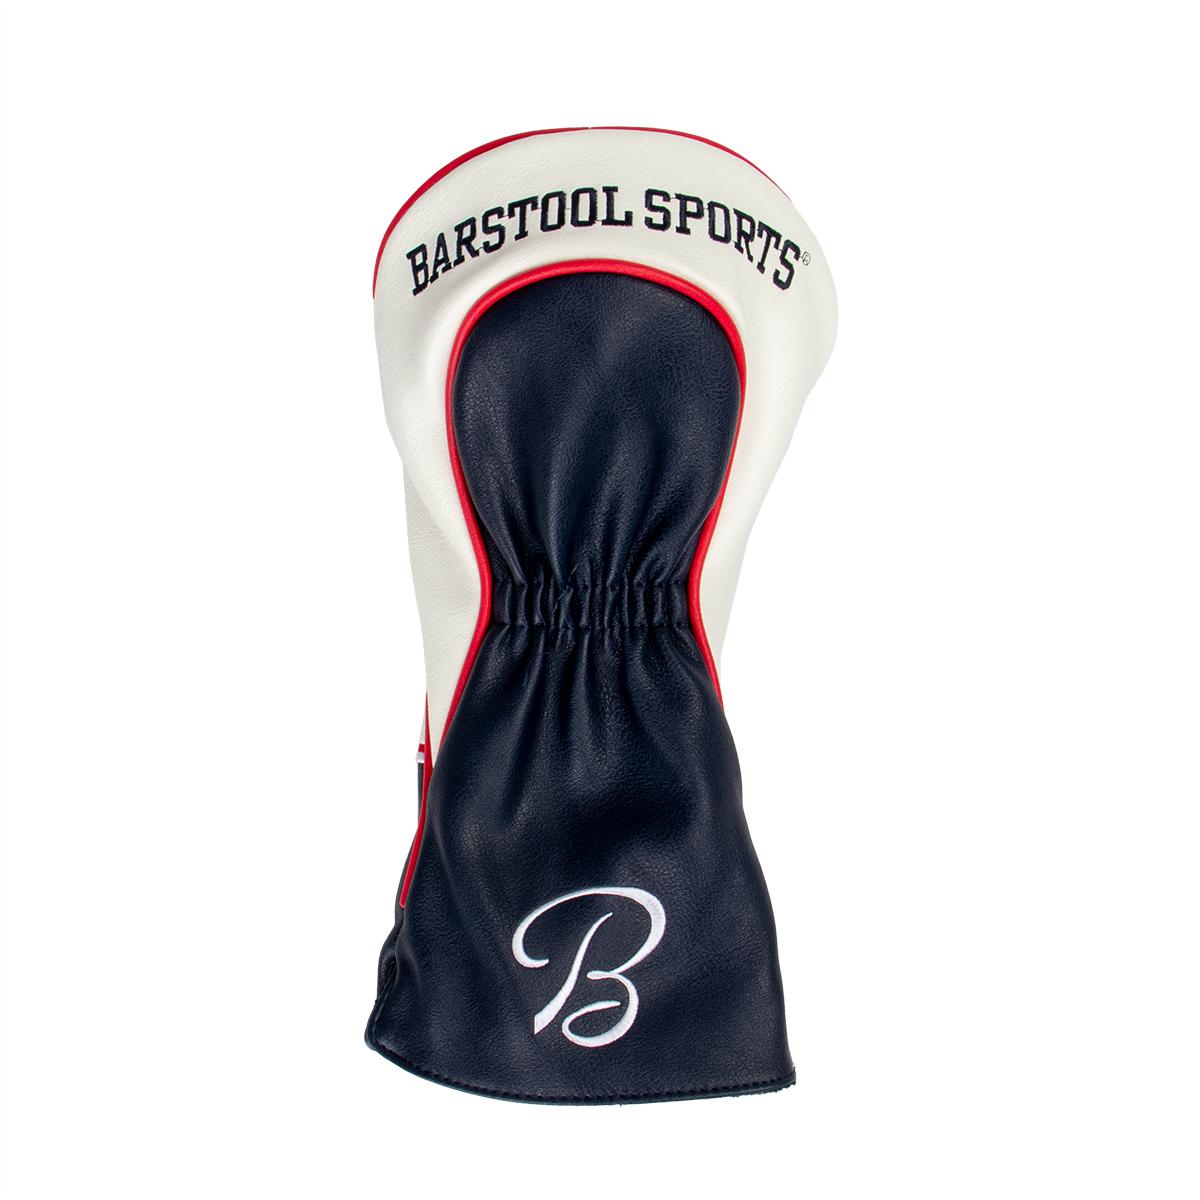 Barstool Golf Driver Headcover-Golf Accessories-Fore Play-Navy-One Size-Barstool Sports